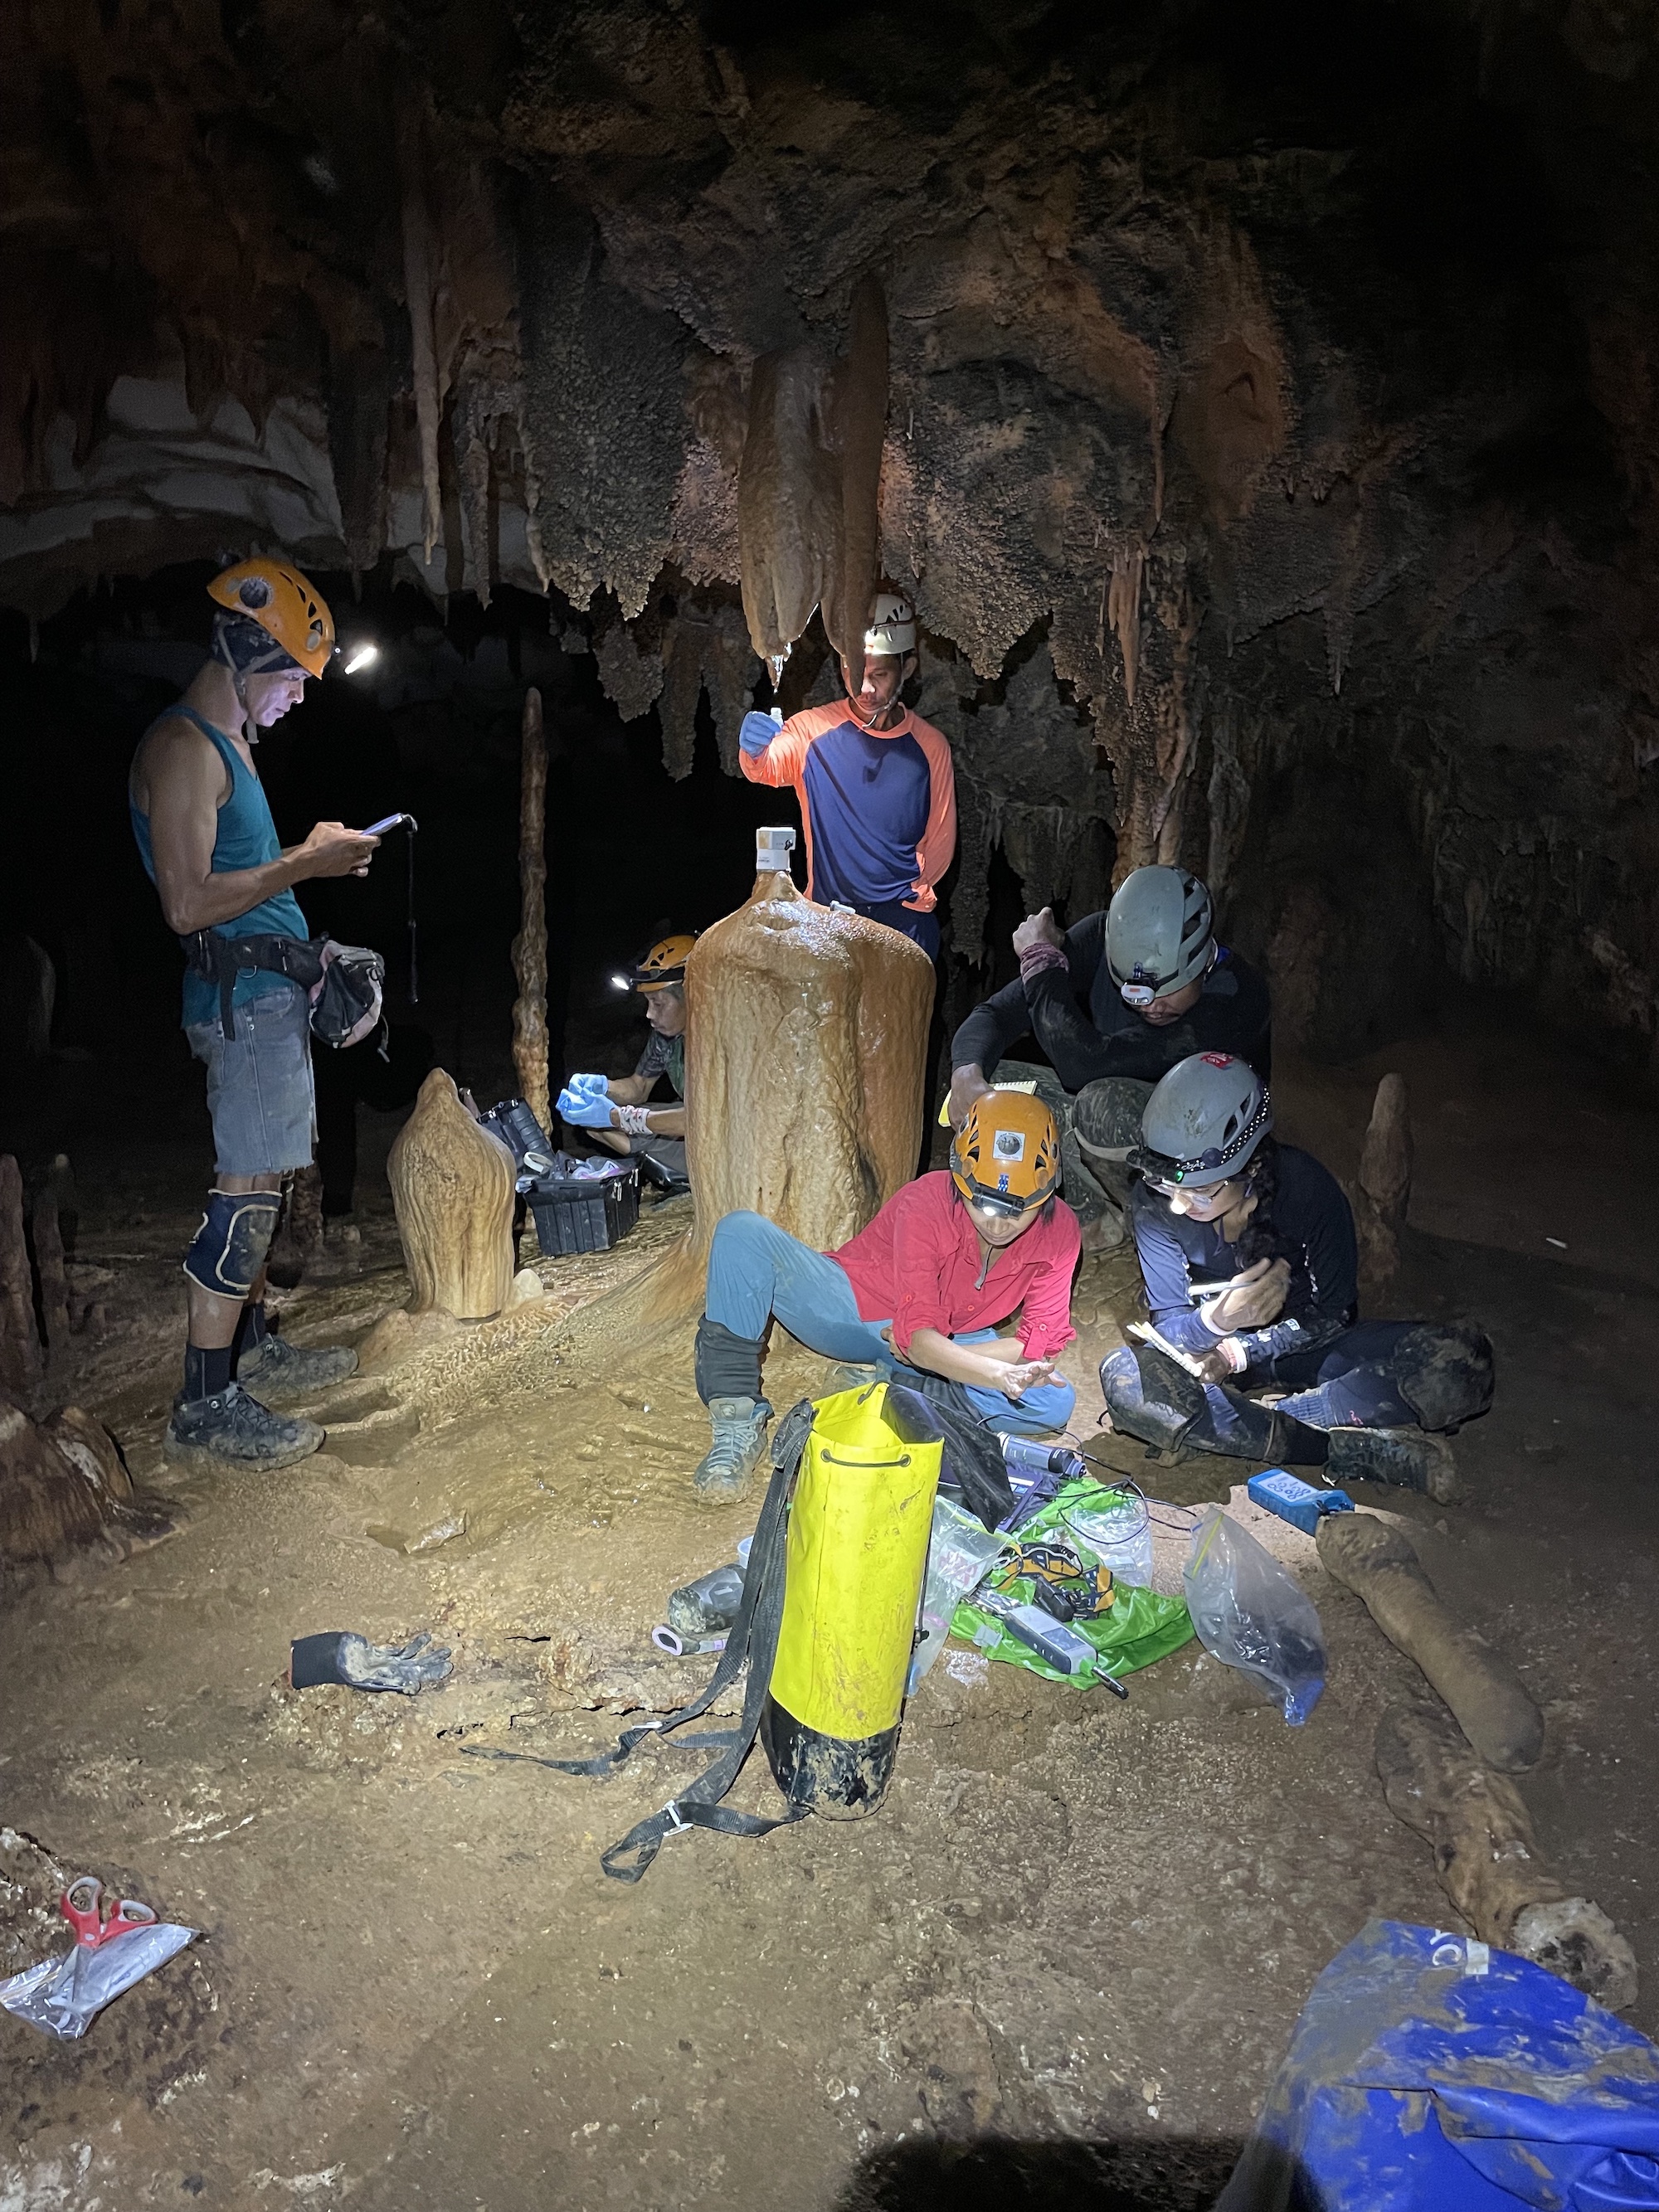 Natasha and her collaborators discuss cave-air temperature and collect drip water for analysis